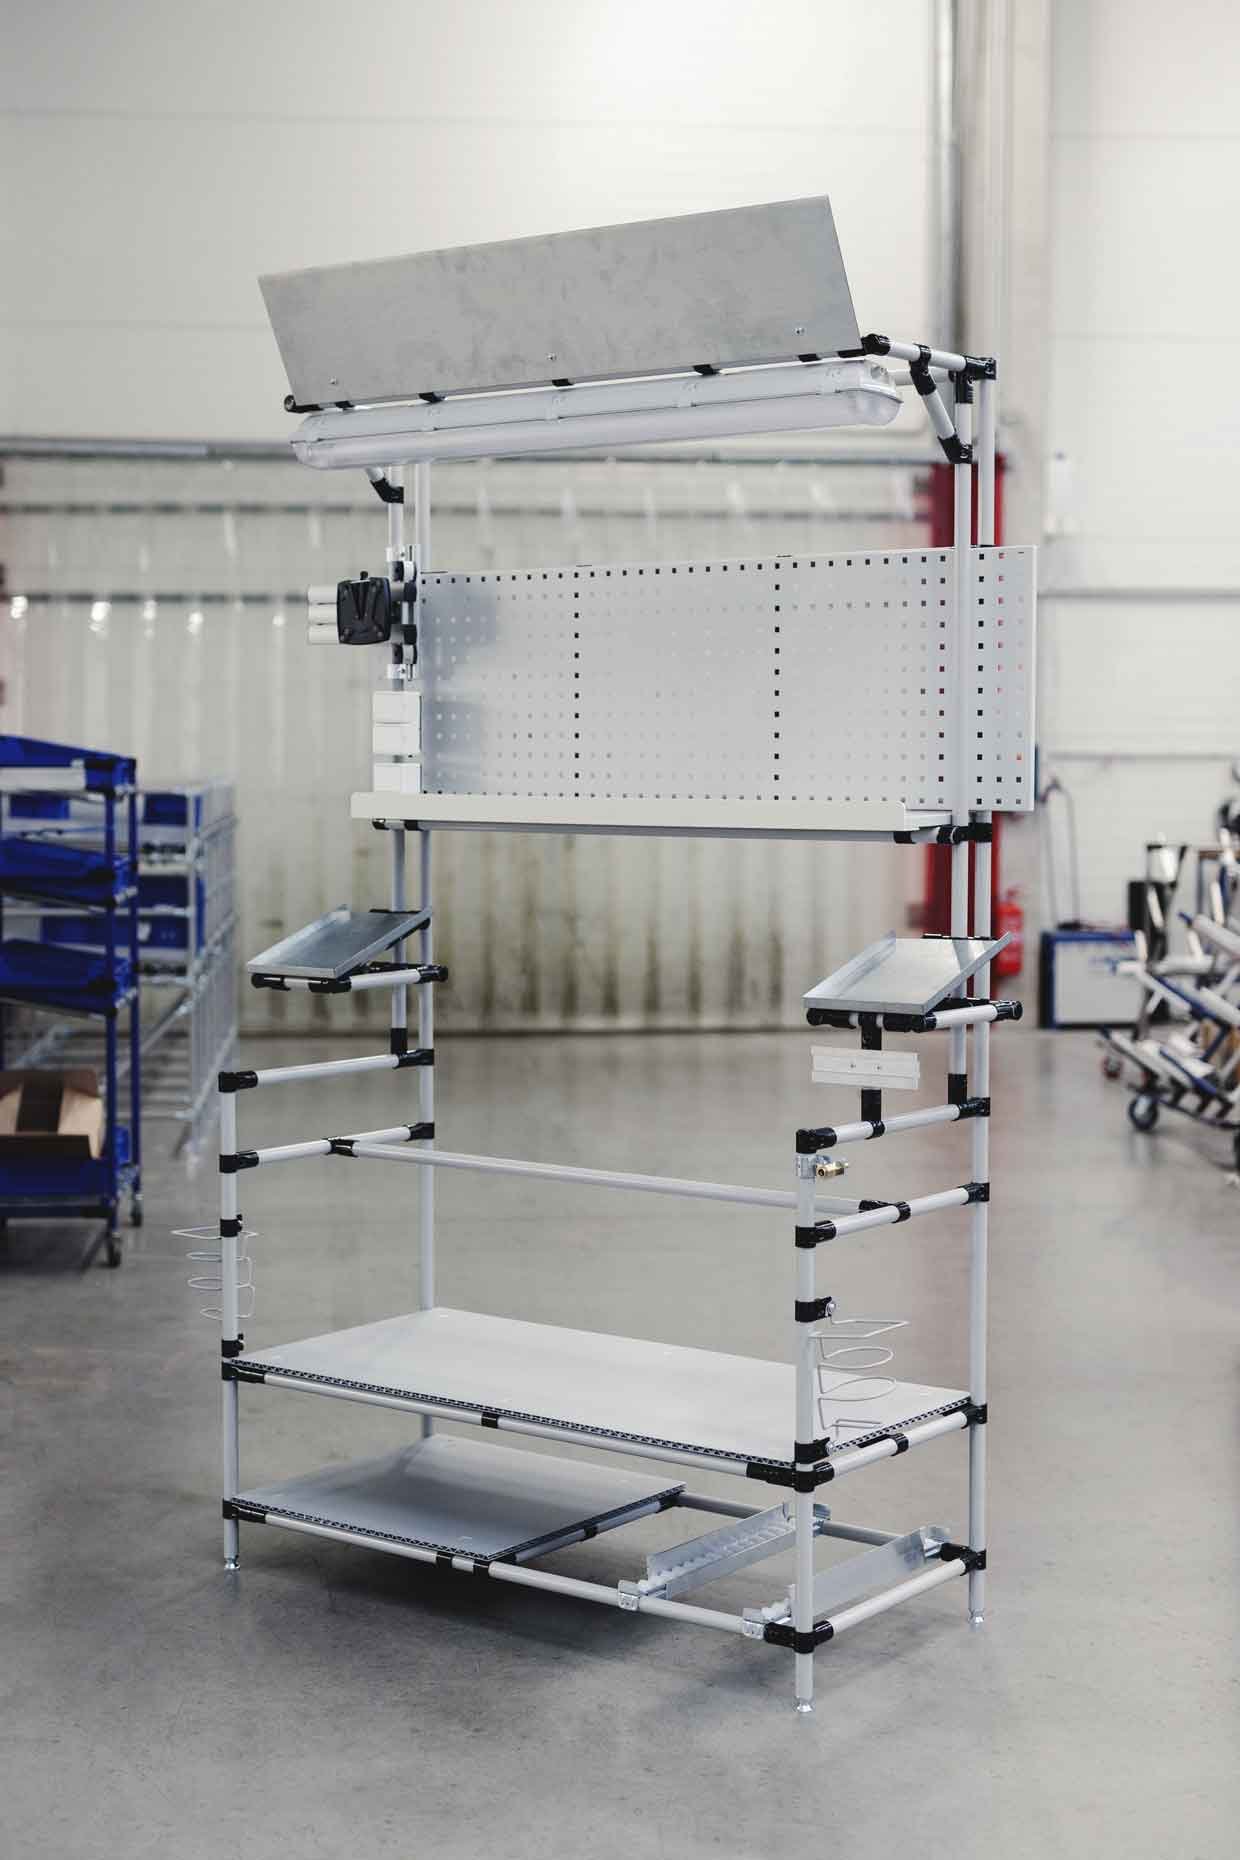 Assembly workstation made of round tubing with height-adjustable feet to compensate for unevenness